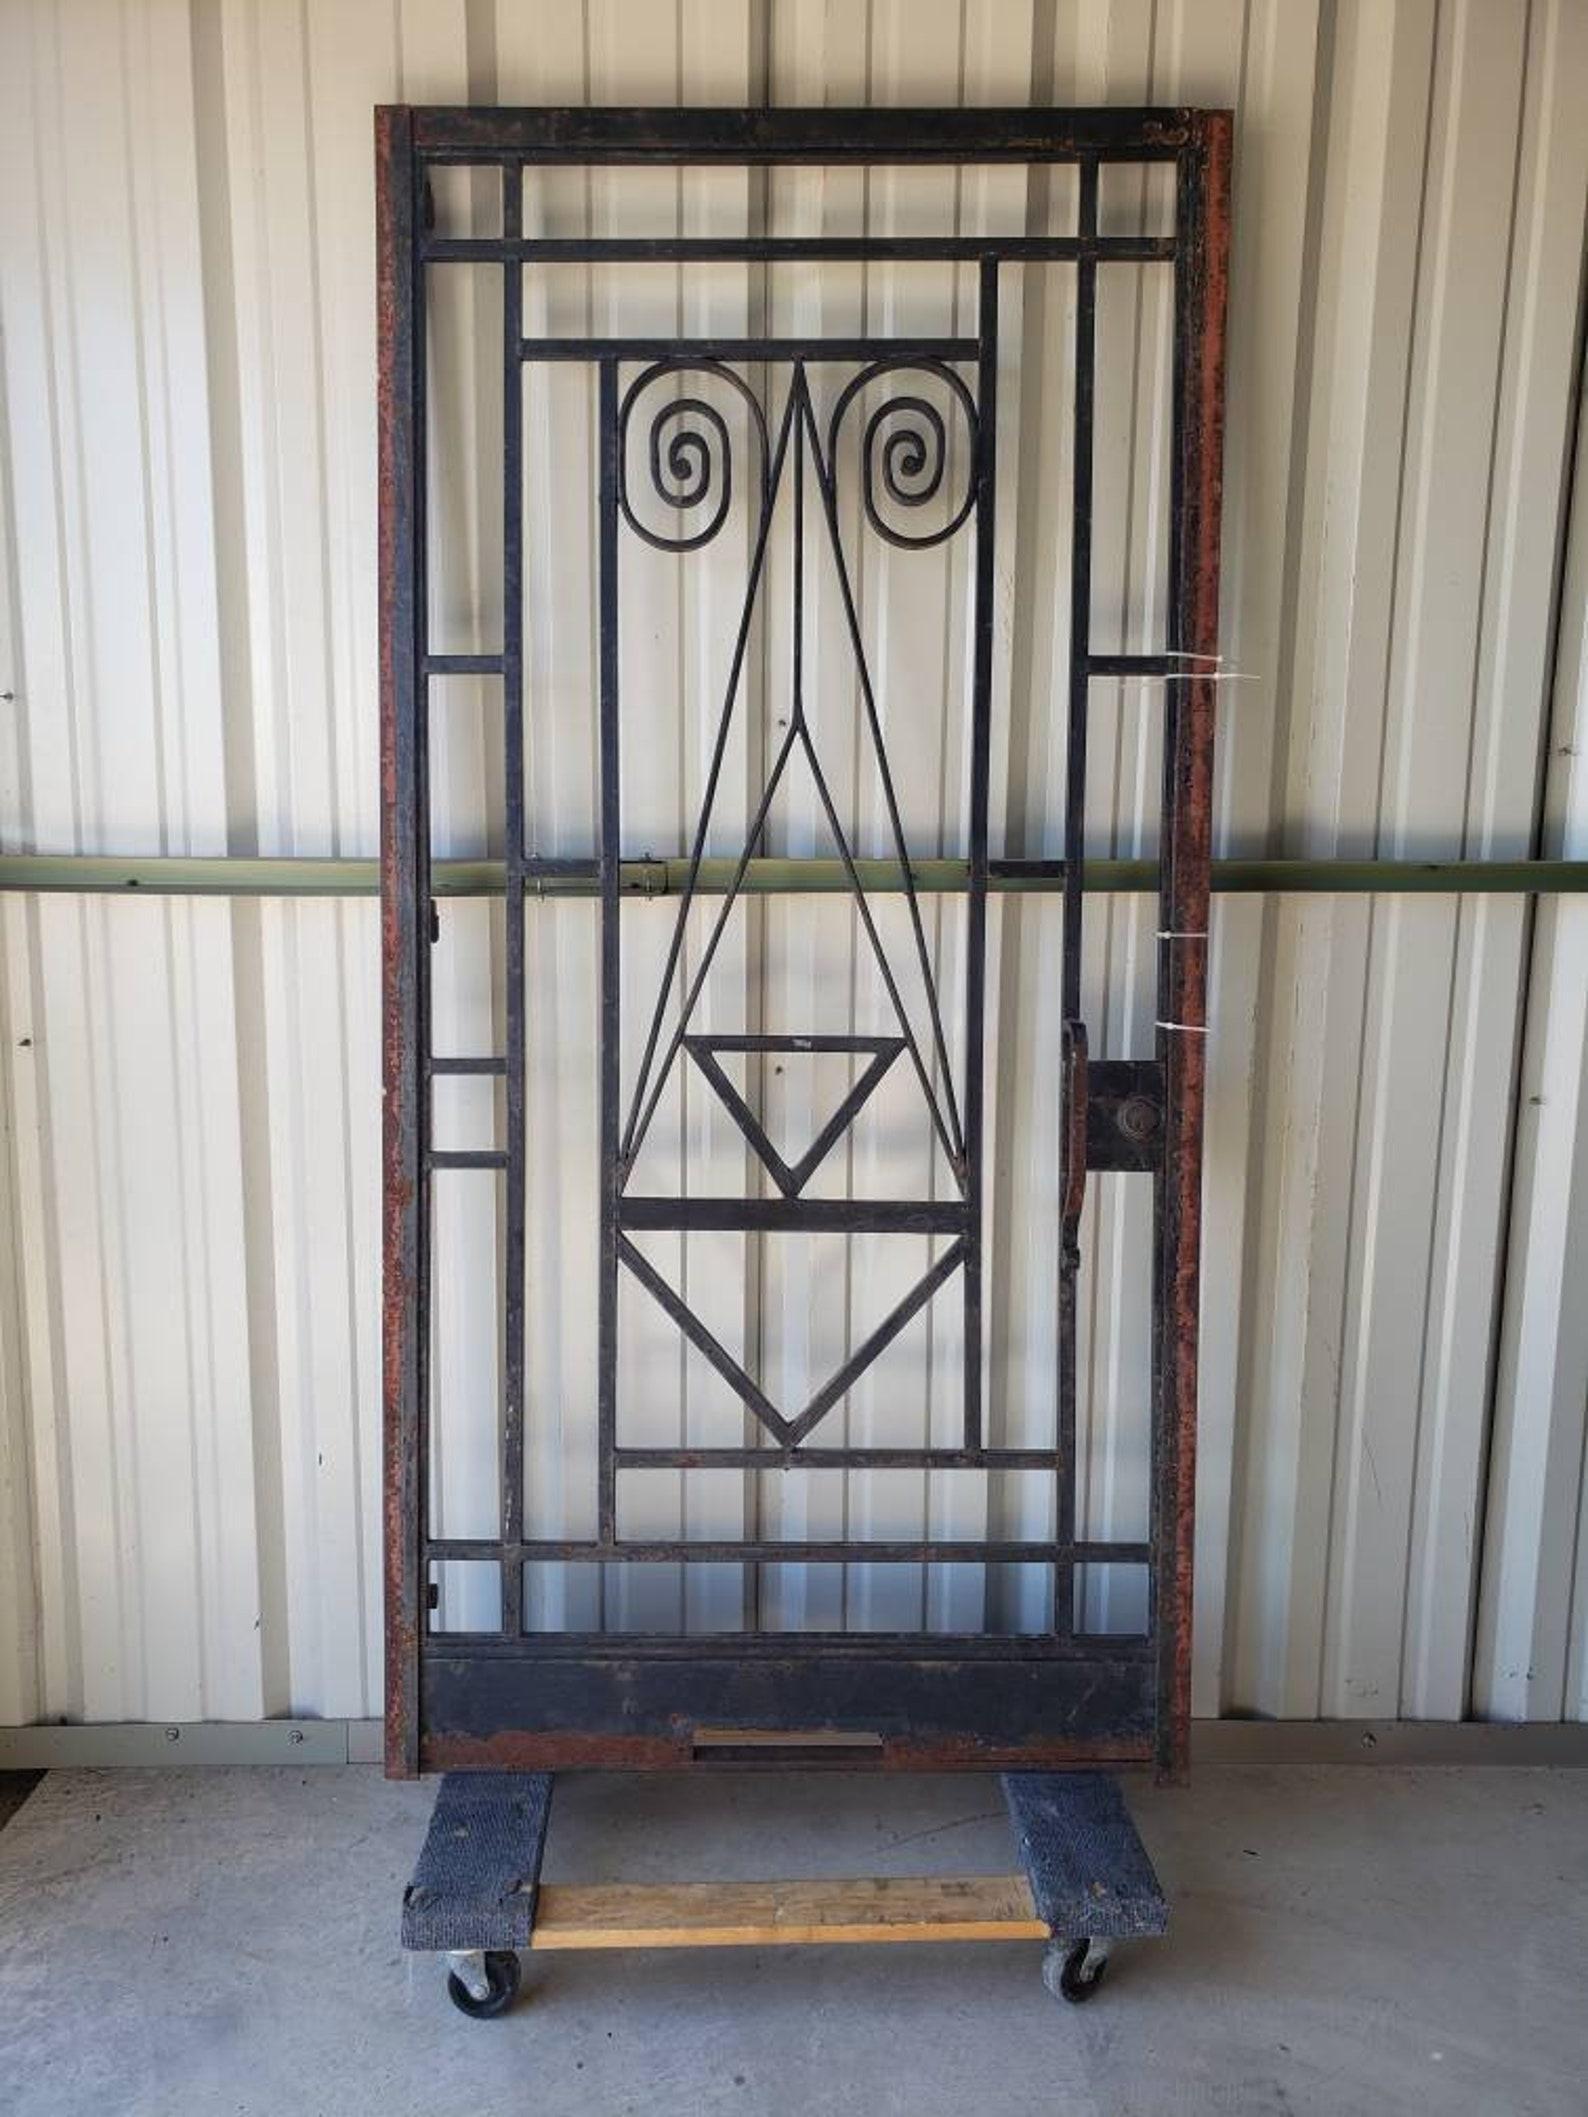 A magnificent, period, custom, one of a kind, European Art Deco gated door frame from the early 20th century. 

The heavy, hand forged wrought iron architectural salvage masterpiece featuring sculptural spiral scroll, angular, geometric motif. The